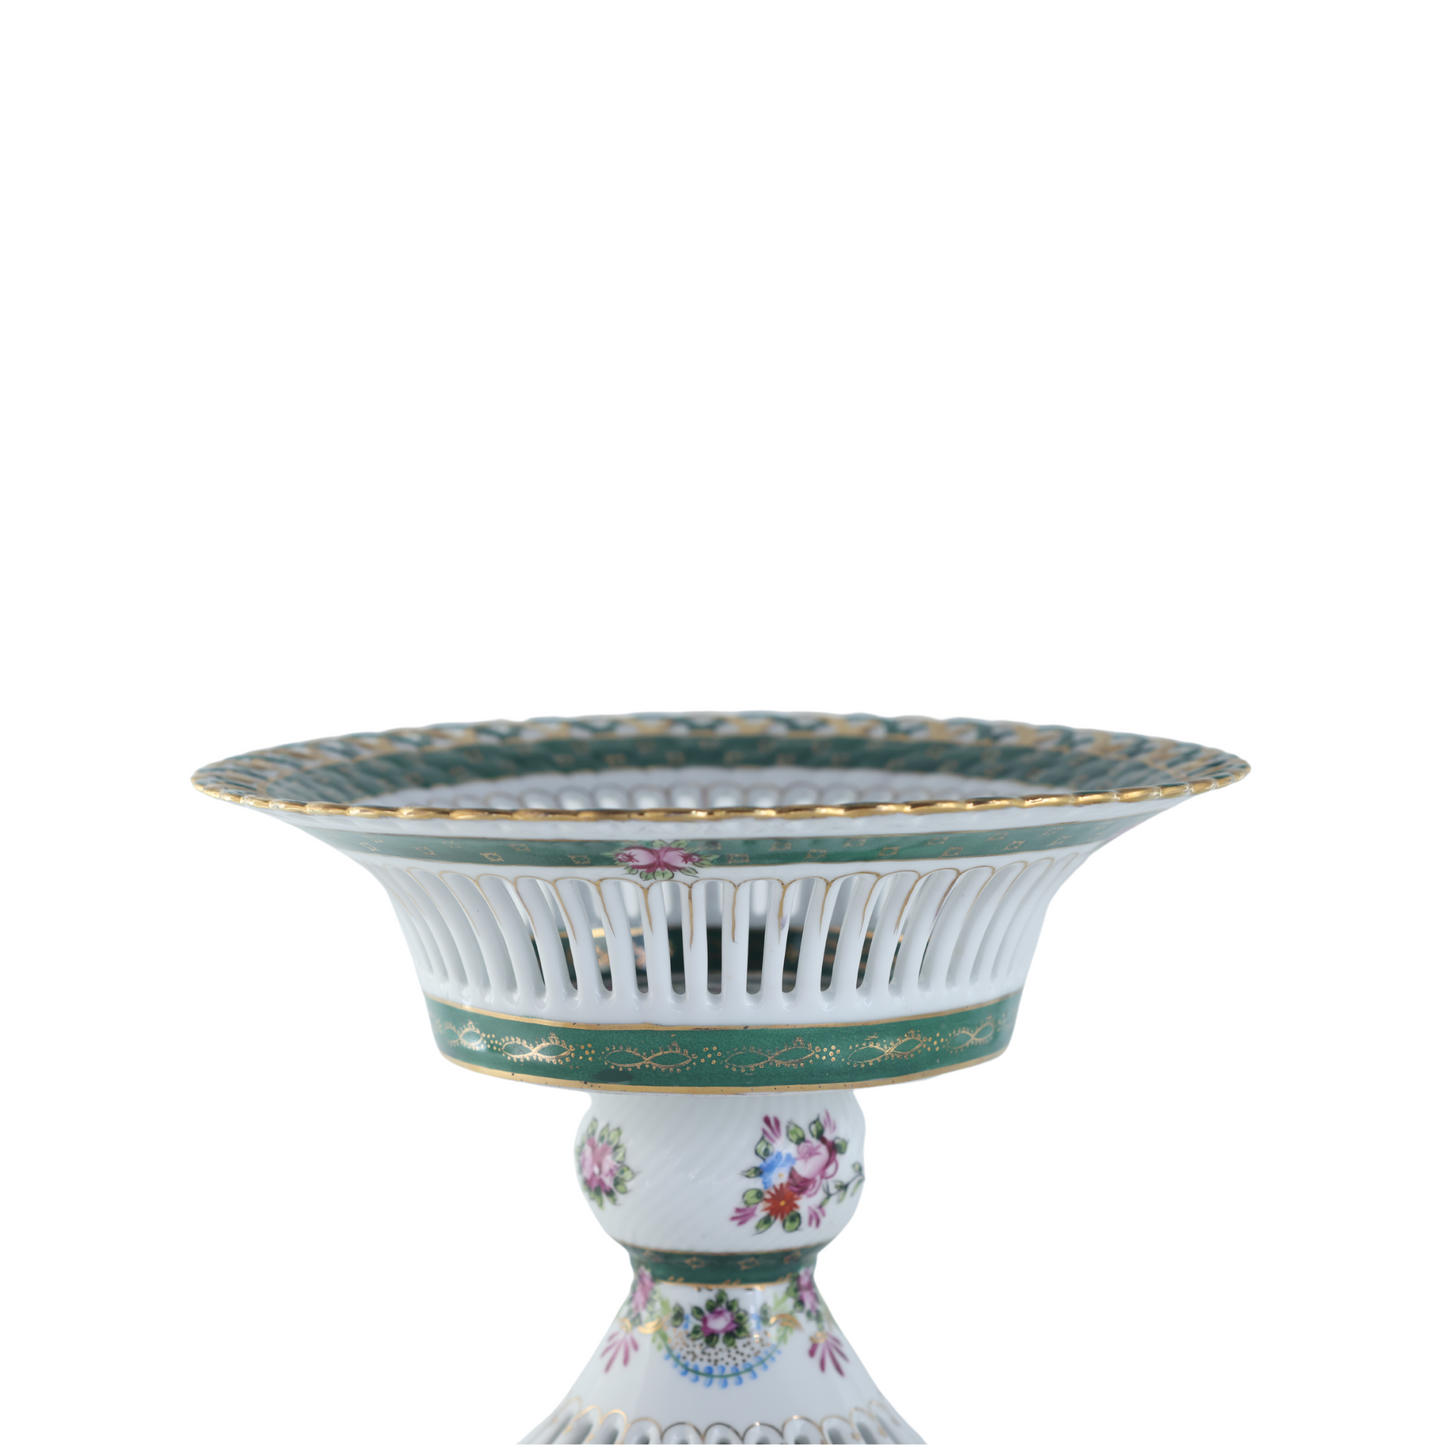 Hand-painted Decorative Fruit Bowl with Flower Motif